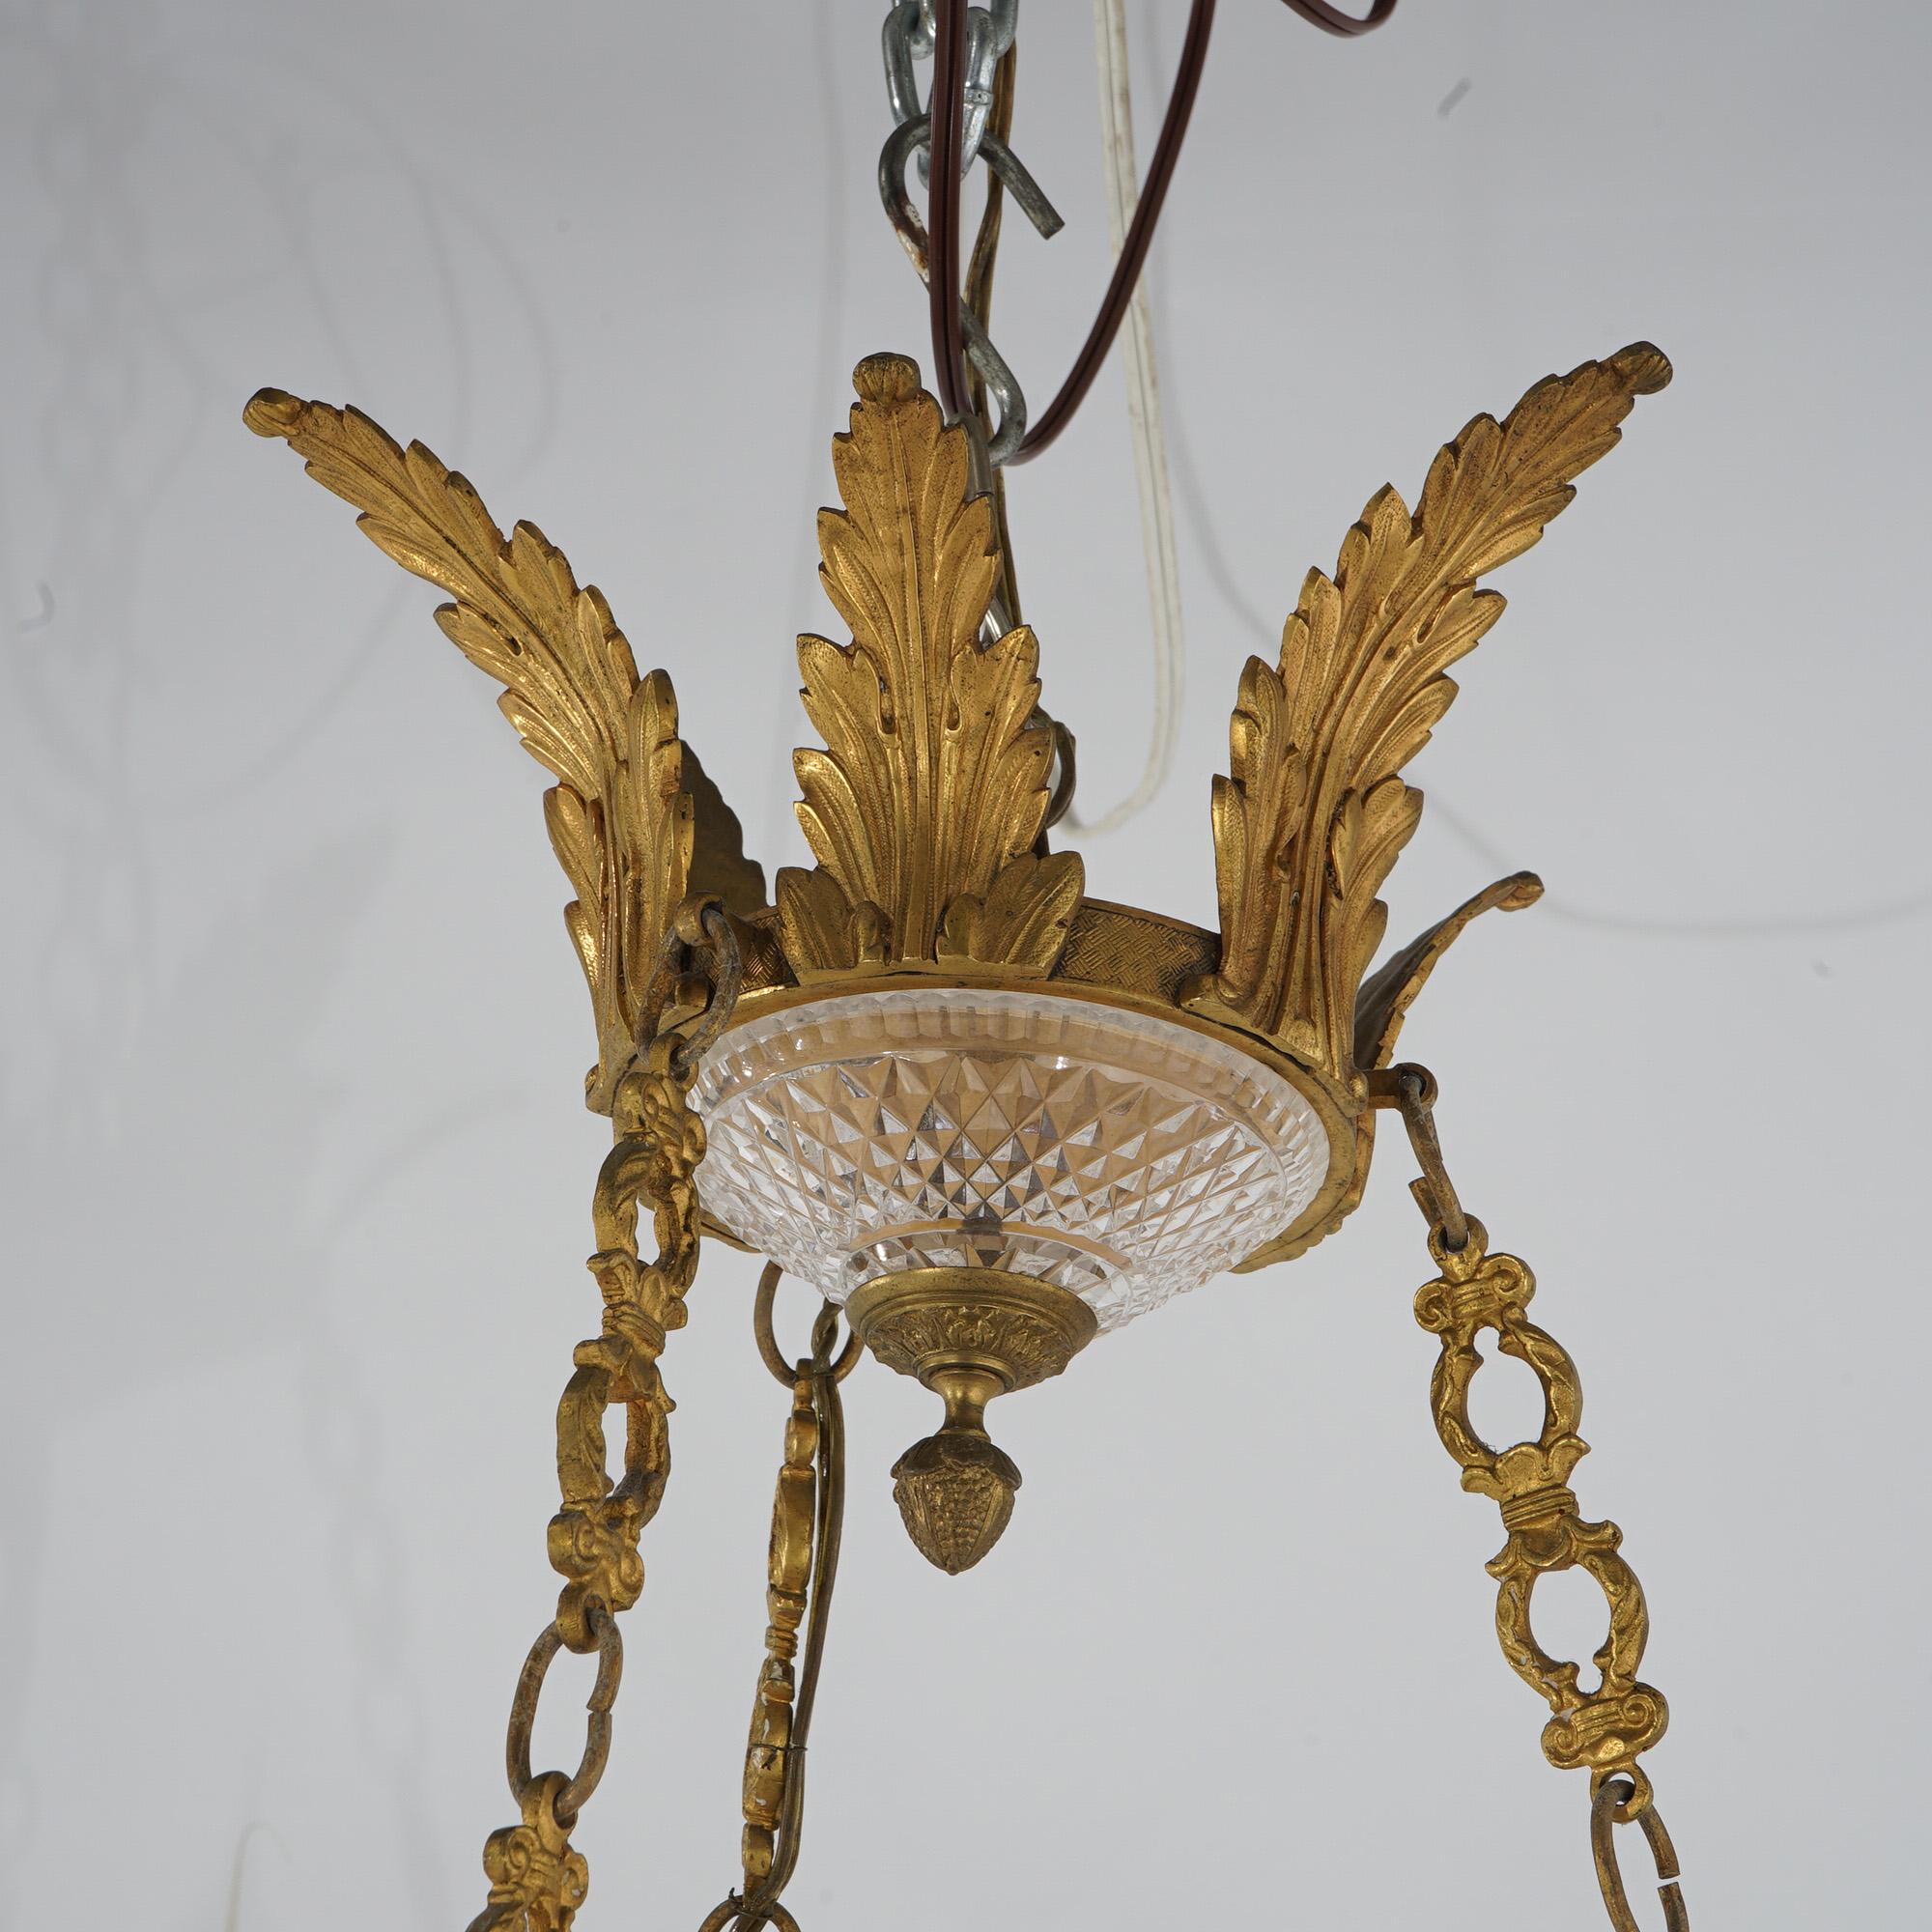 Antique French Louis XIV Style Gilt Bronze & Crystal Nine-Light Chandelier For Sale 6